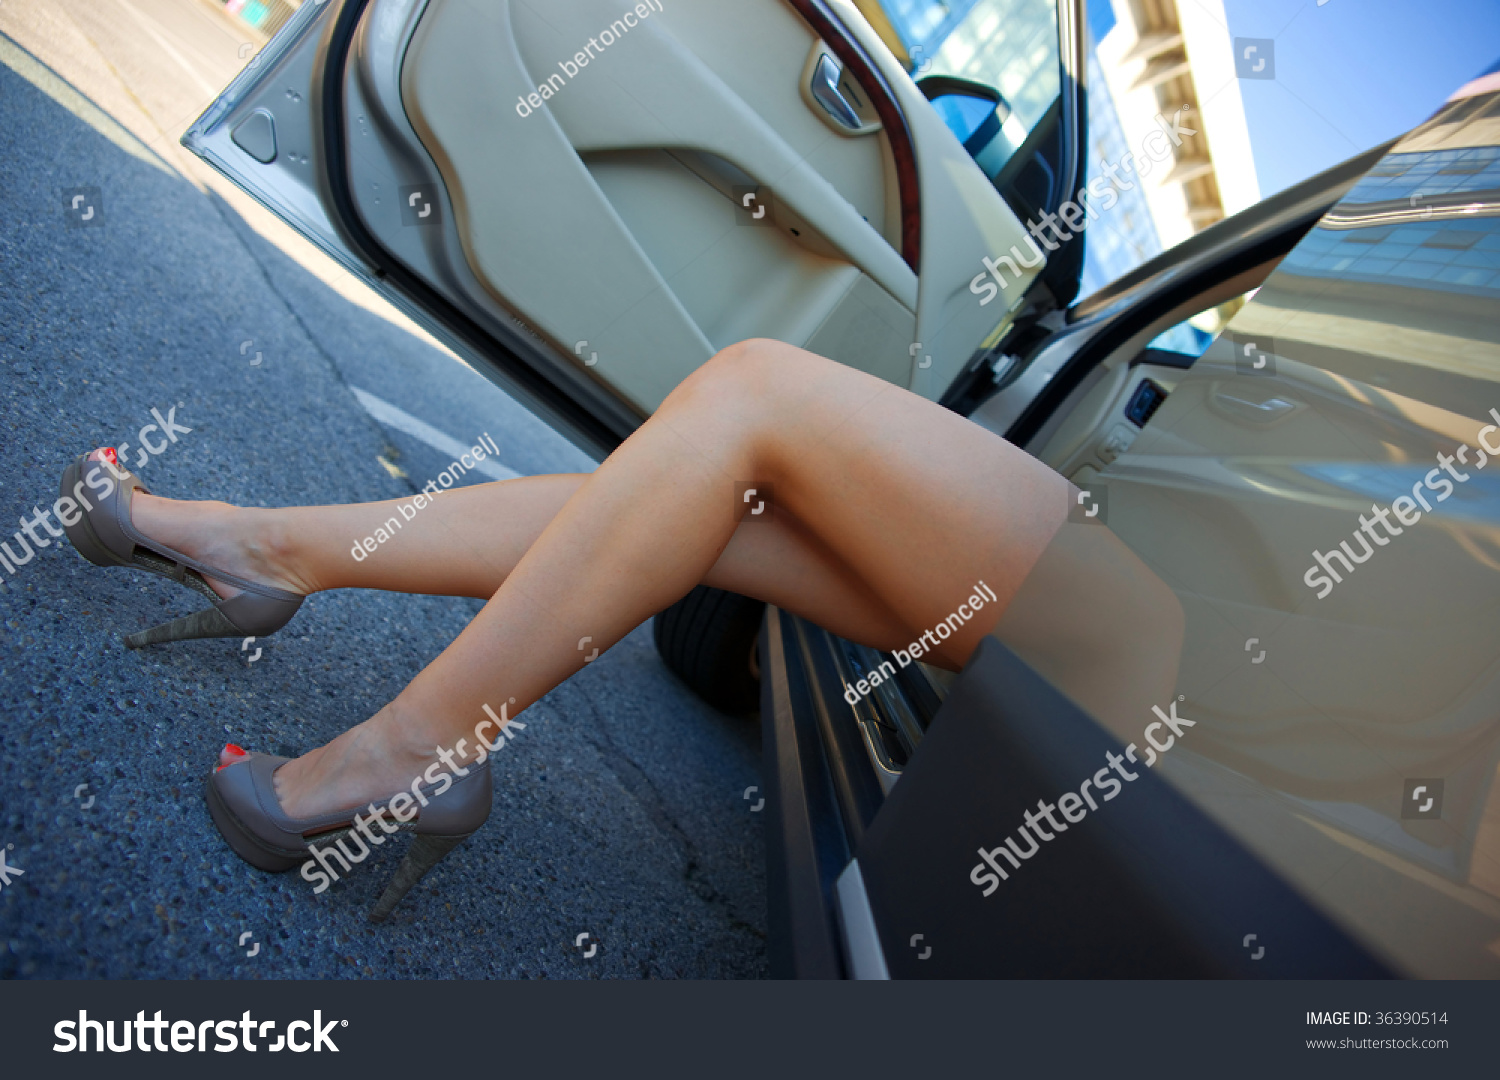 Woman Legs In High Heels At The Car Stock Photo 36390514 : Shutterstock